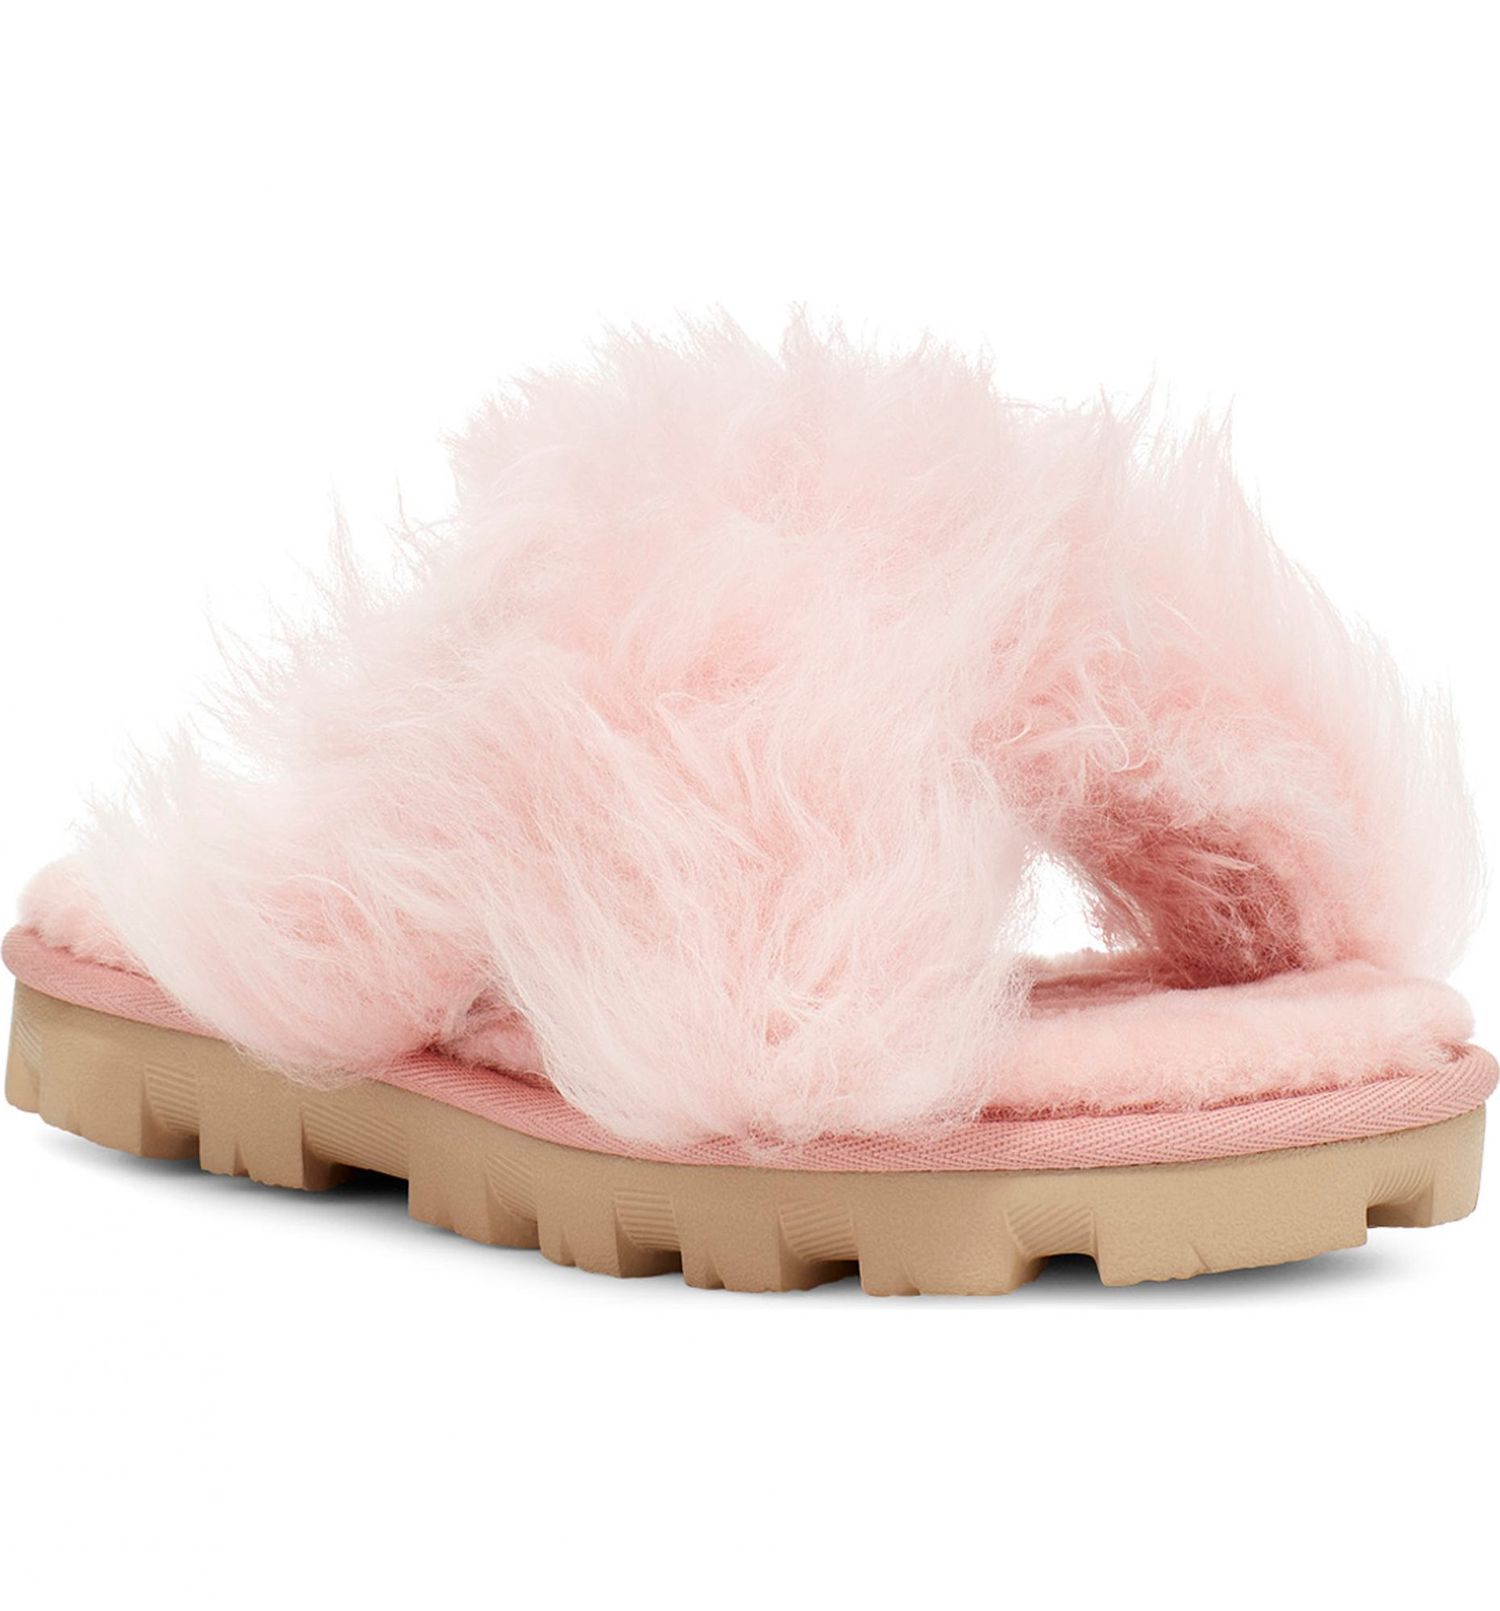 The Fluffy Sandals Celebs Love Are On Sale at Nordstrom